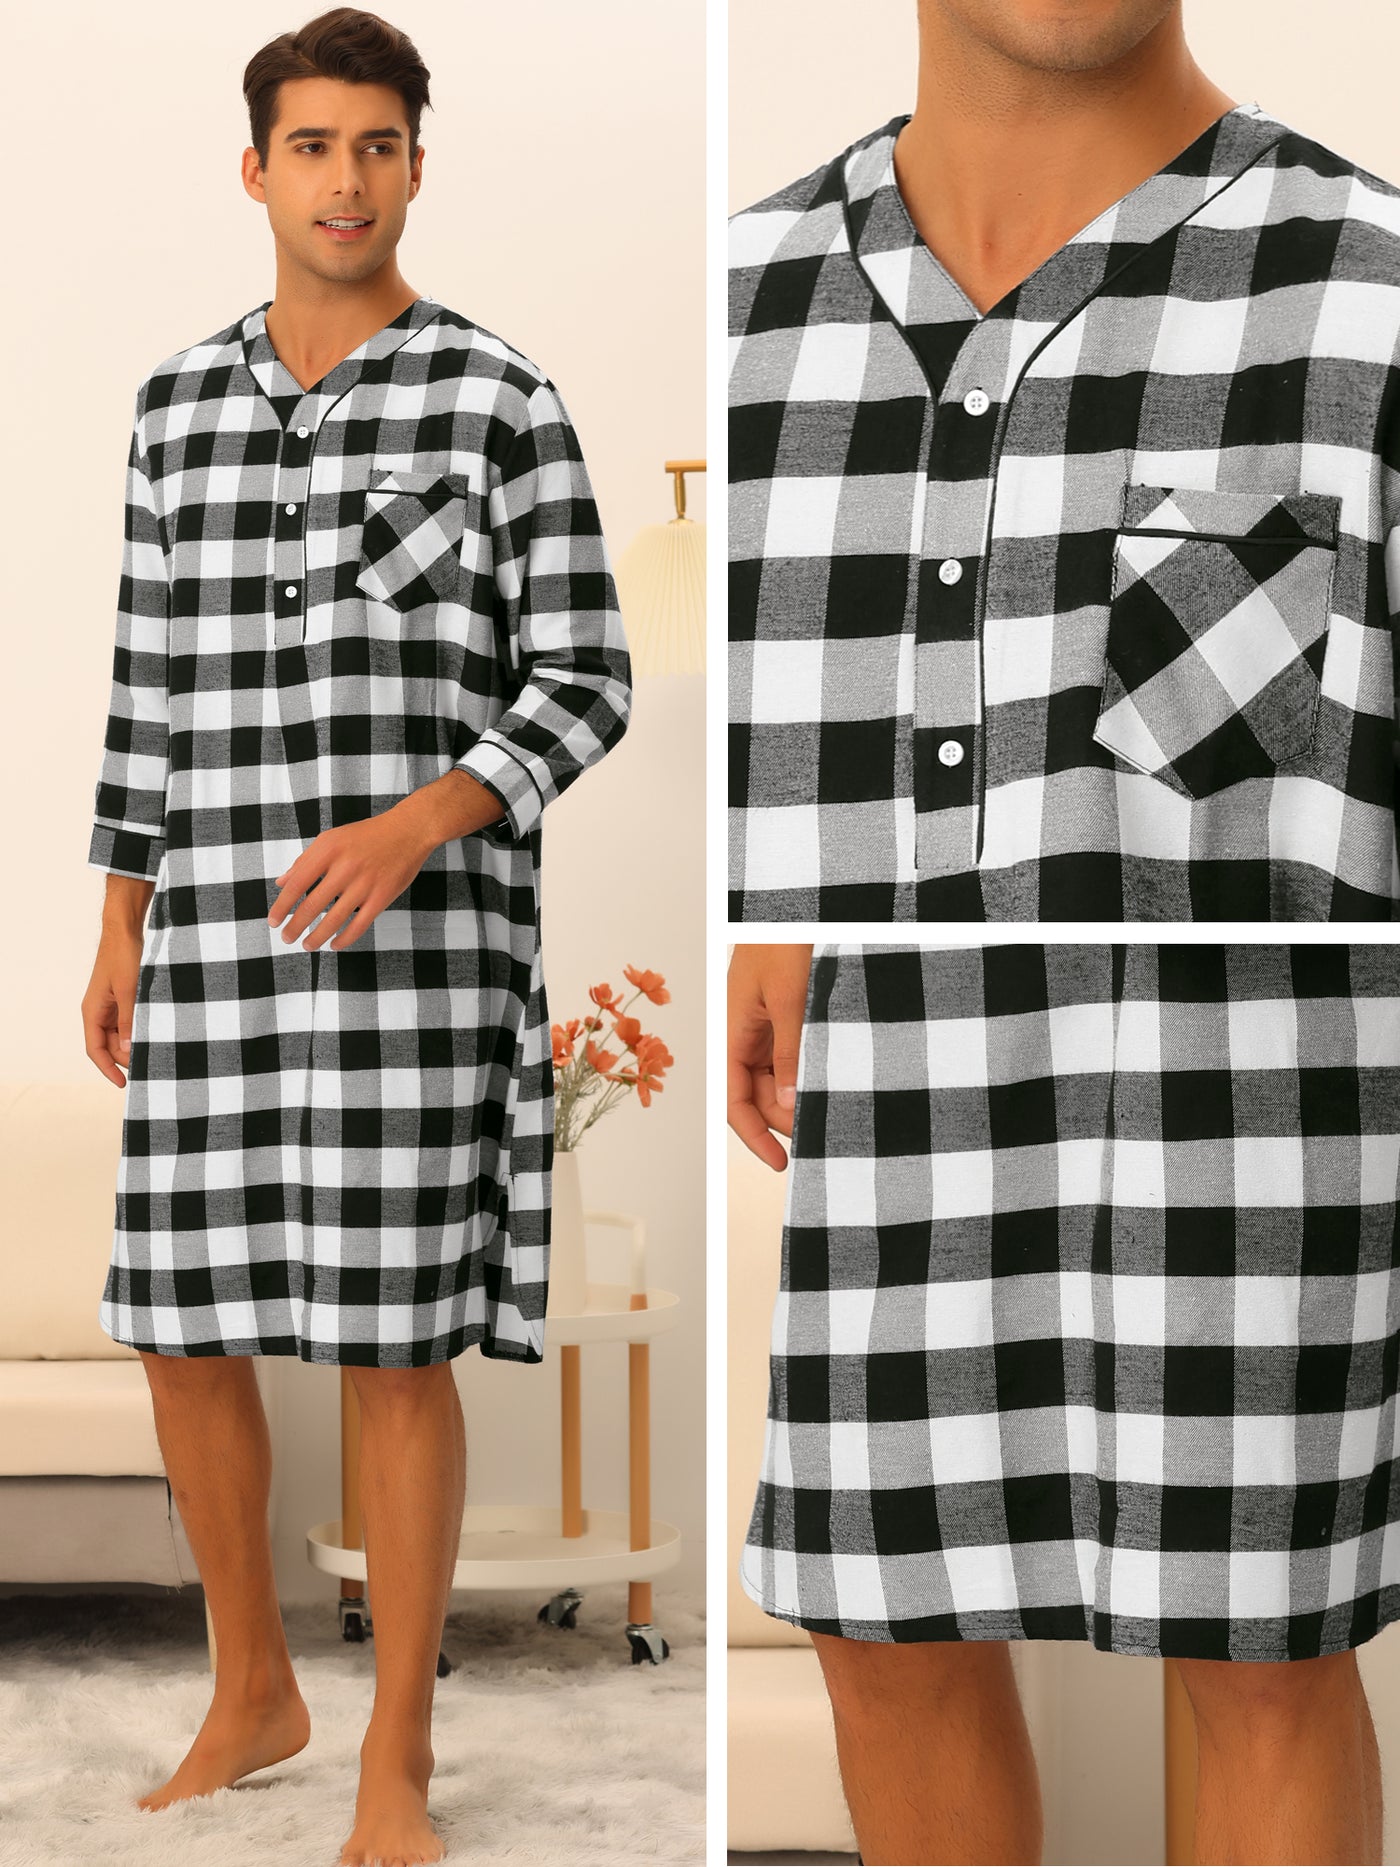 Bublédon Plaid Nightshirts for Men's Loose Fit Henley Neck Checked Pajamas Sleepwear